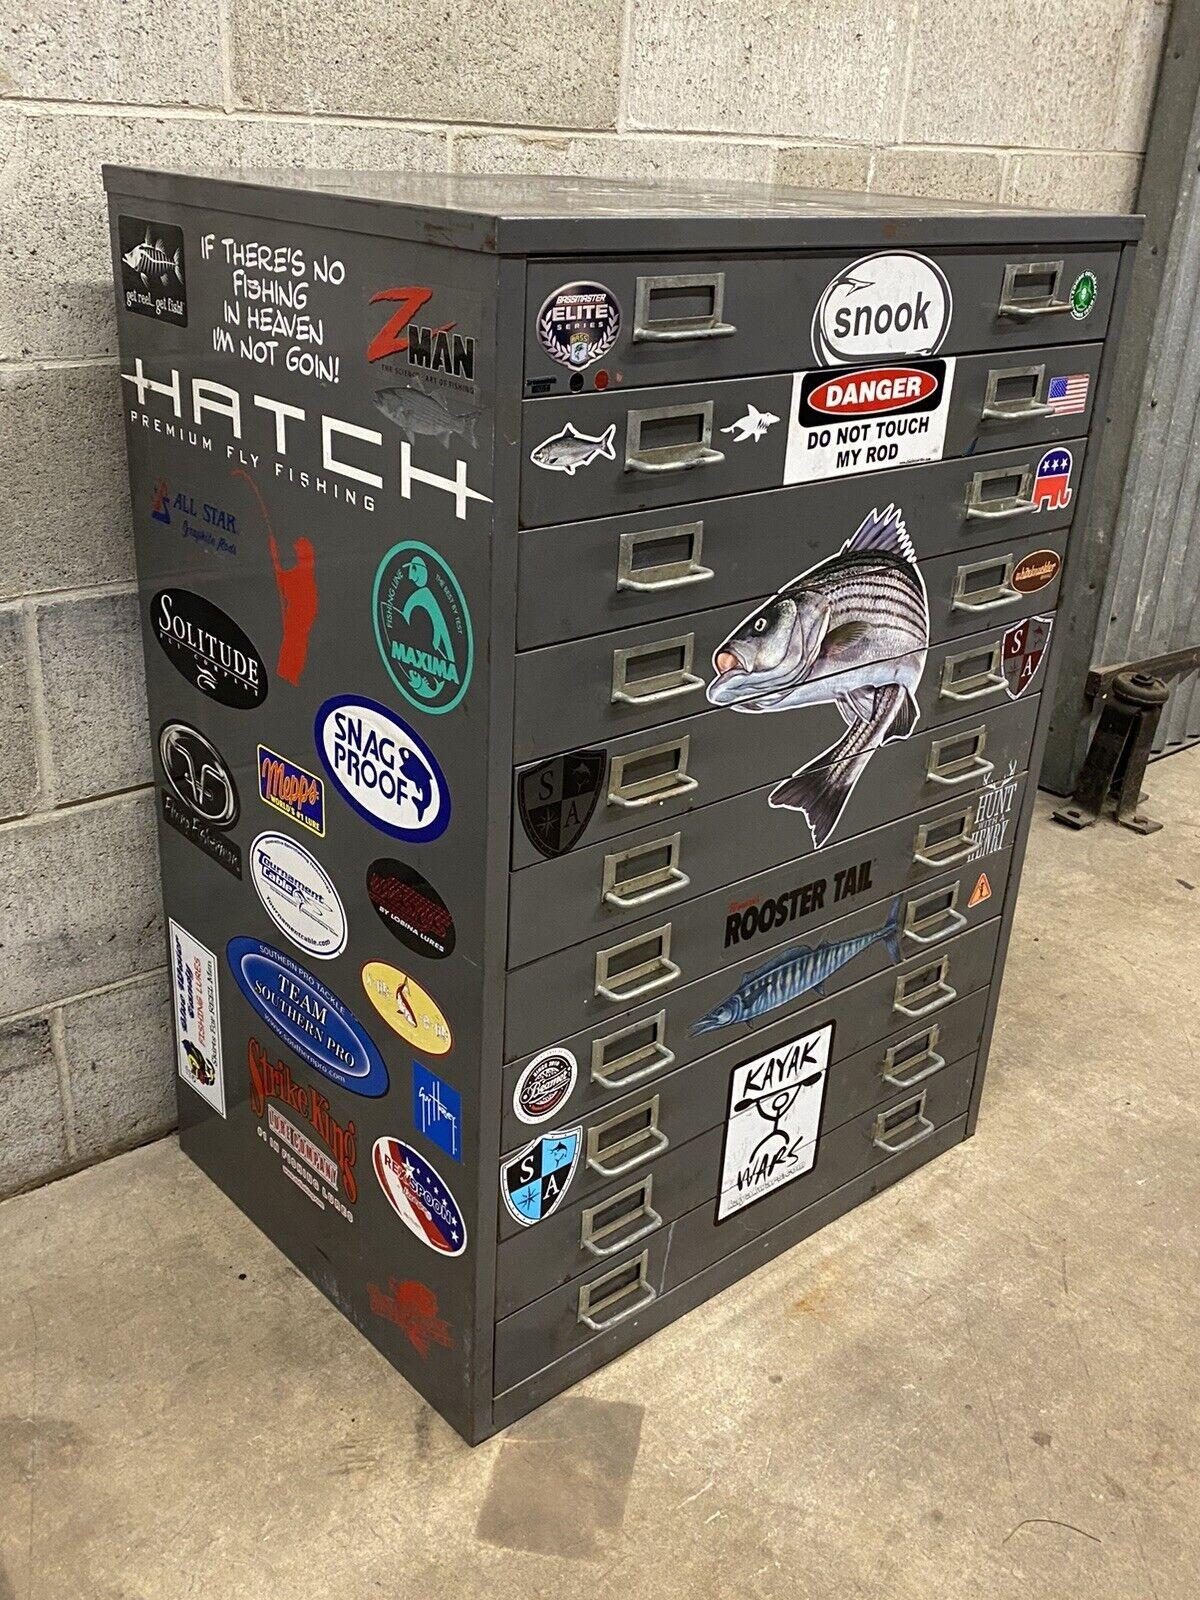 Vintage Steel Metal 11 Drawer Garage Fish Tackle Box Tool Chest Parts Storage Cabinet Item features various stickers throughout. Was used by an avid fisherman/outdoorsman over the years. Circa Late 20th Century. Measurements: 37.5